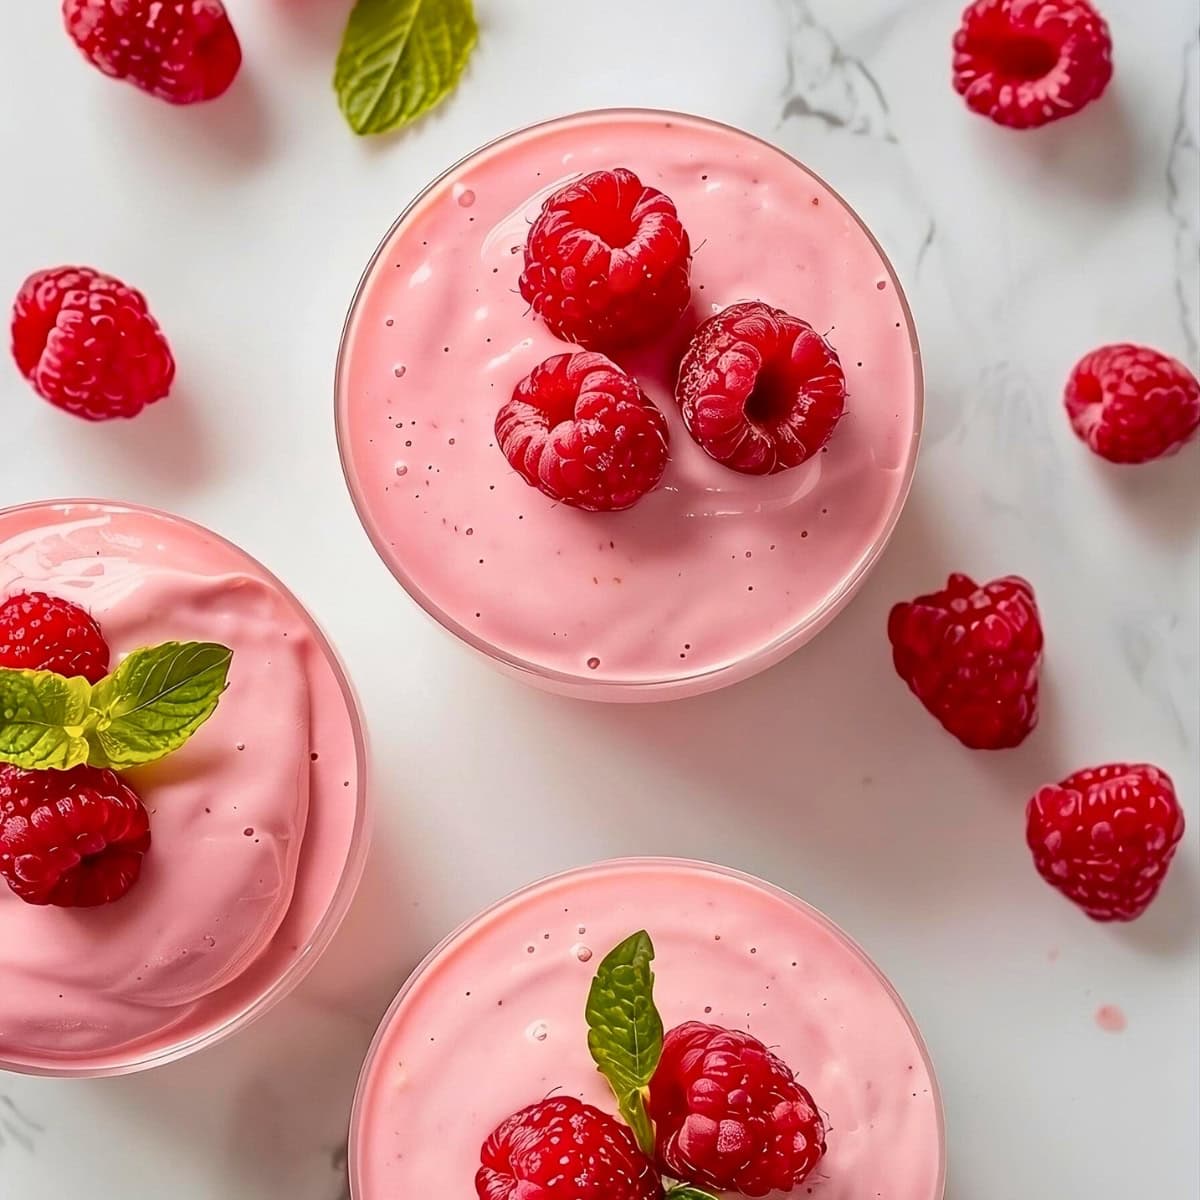 Top view of raspberry mousse in dessert glasses.